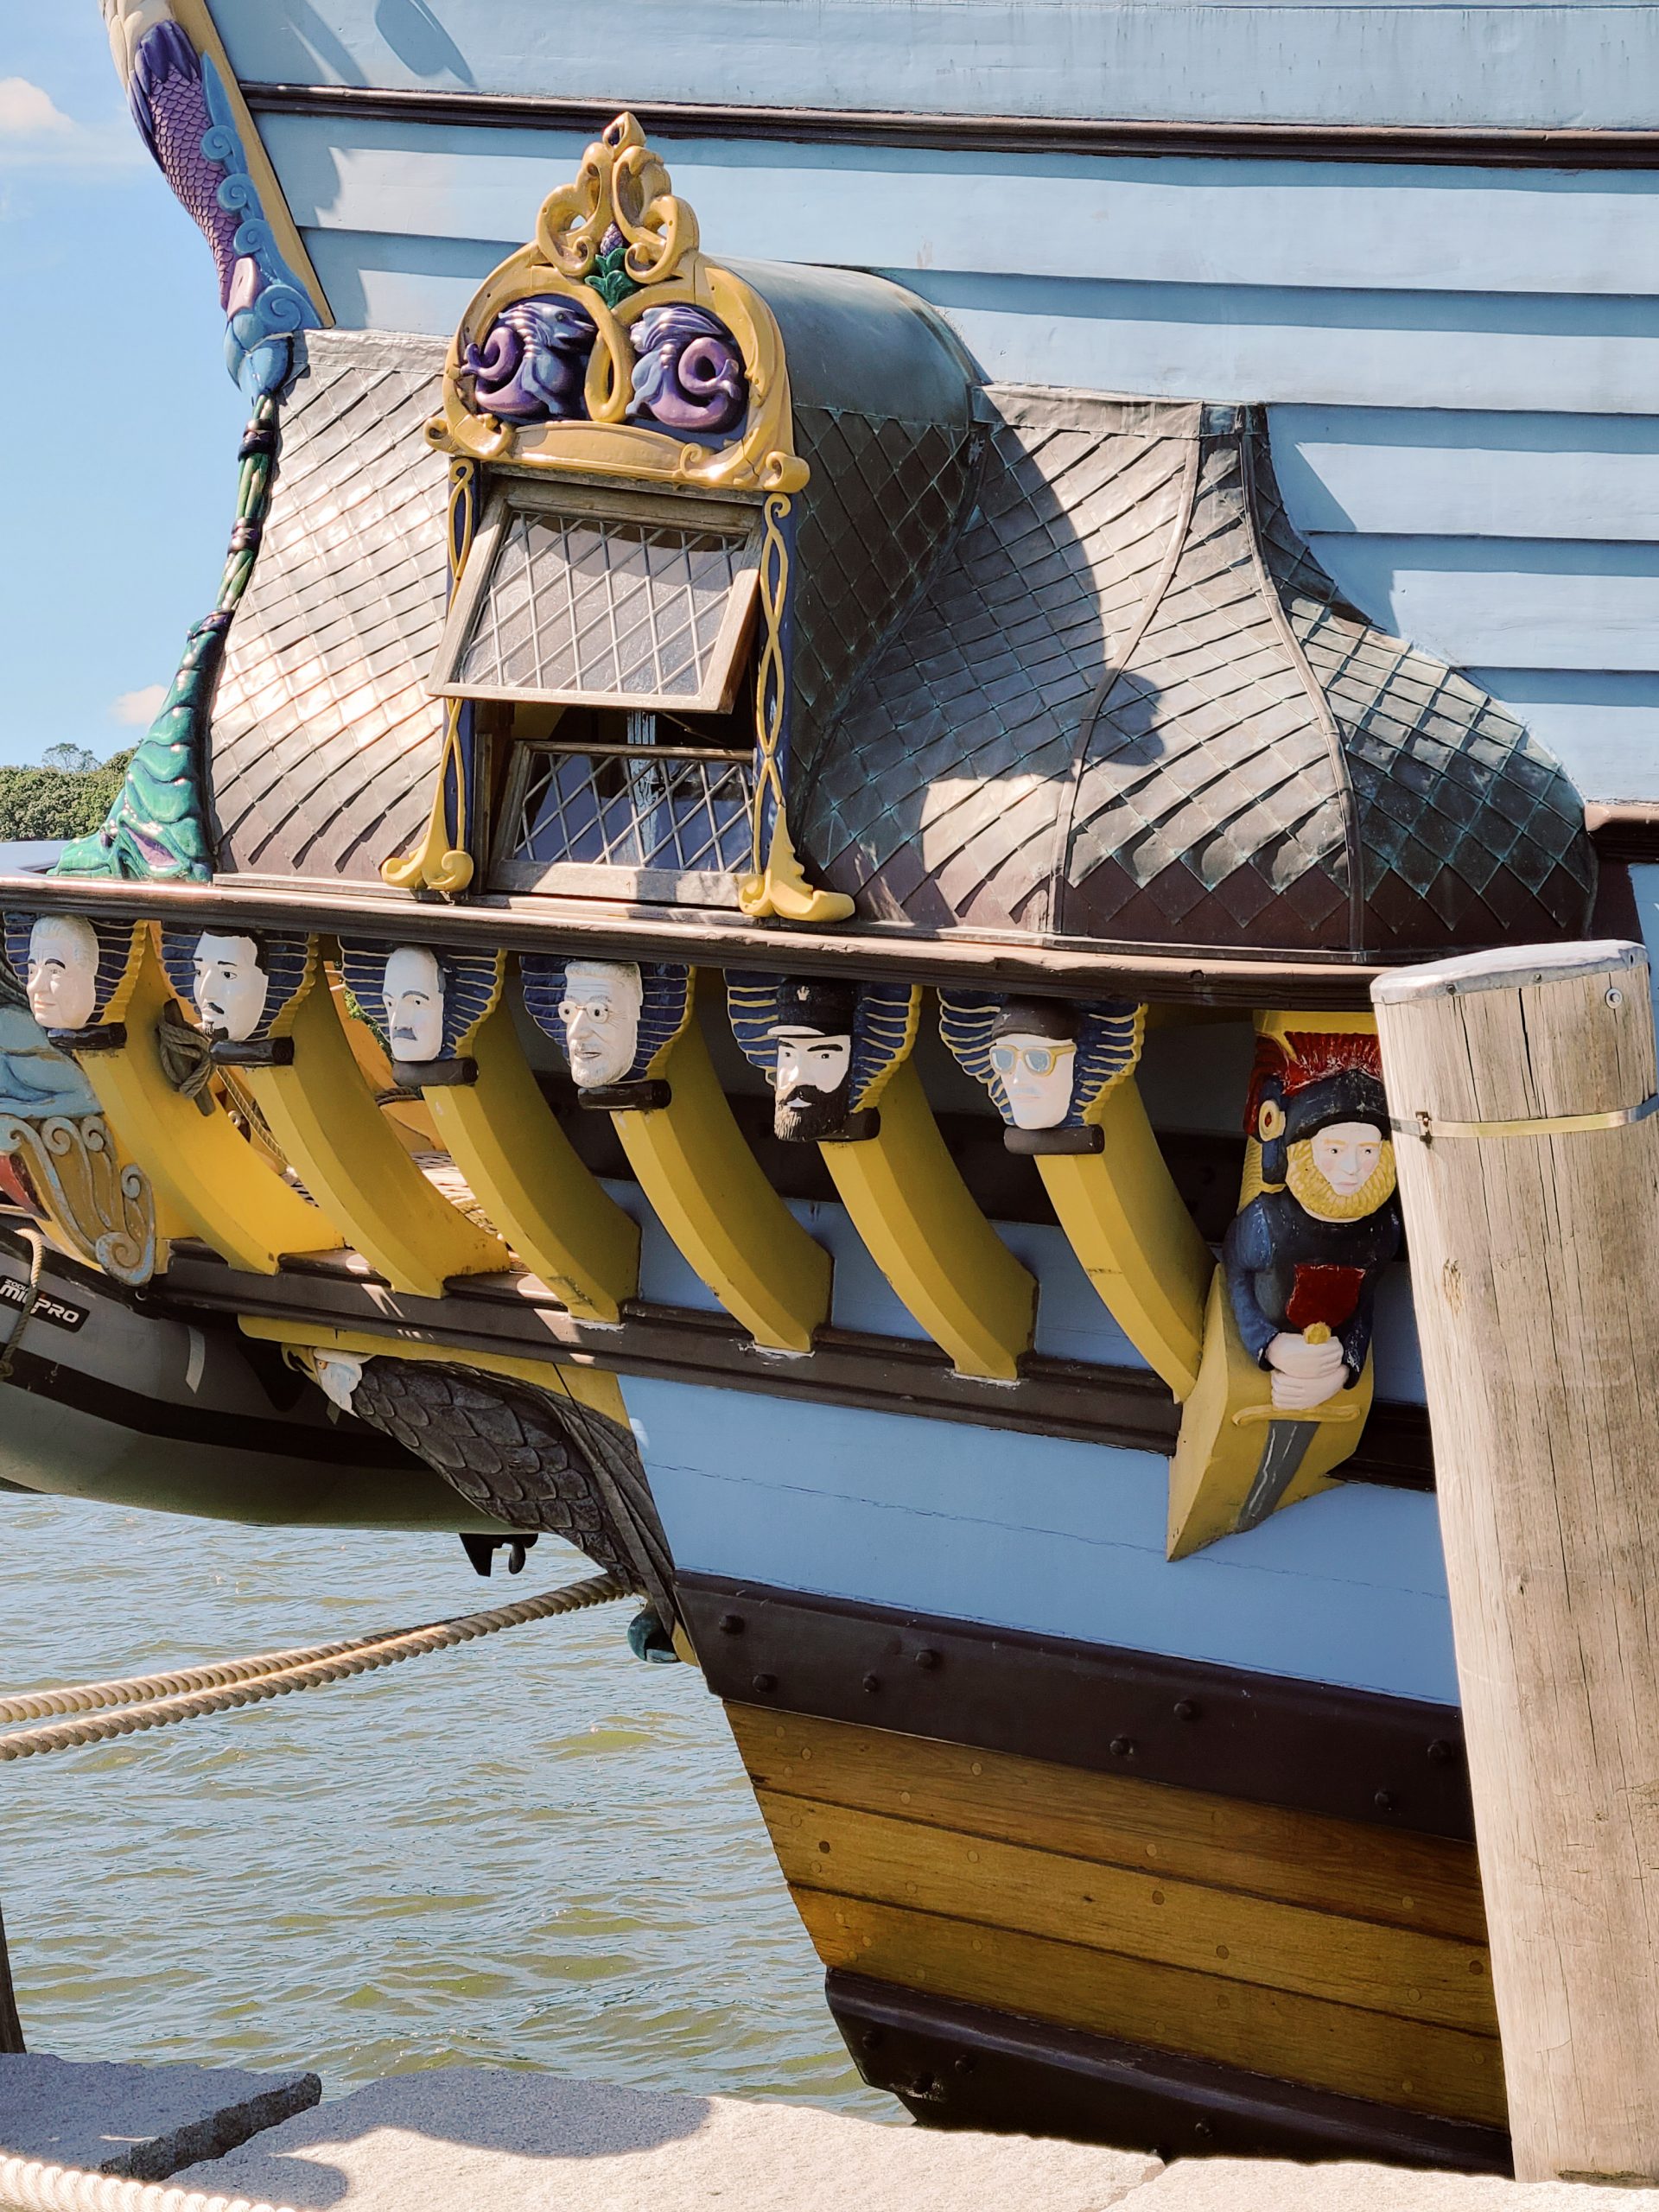 Close up photo of the details on the back of the pirate ship